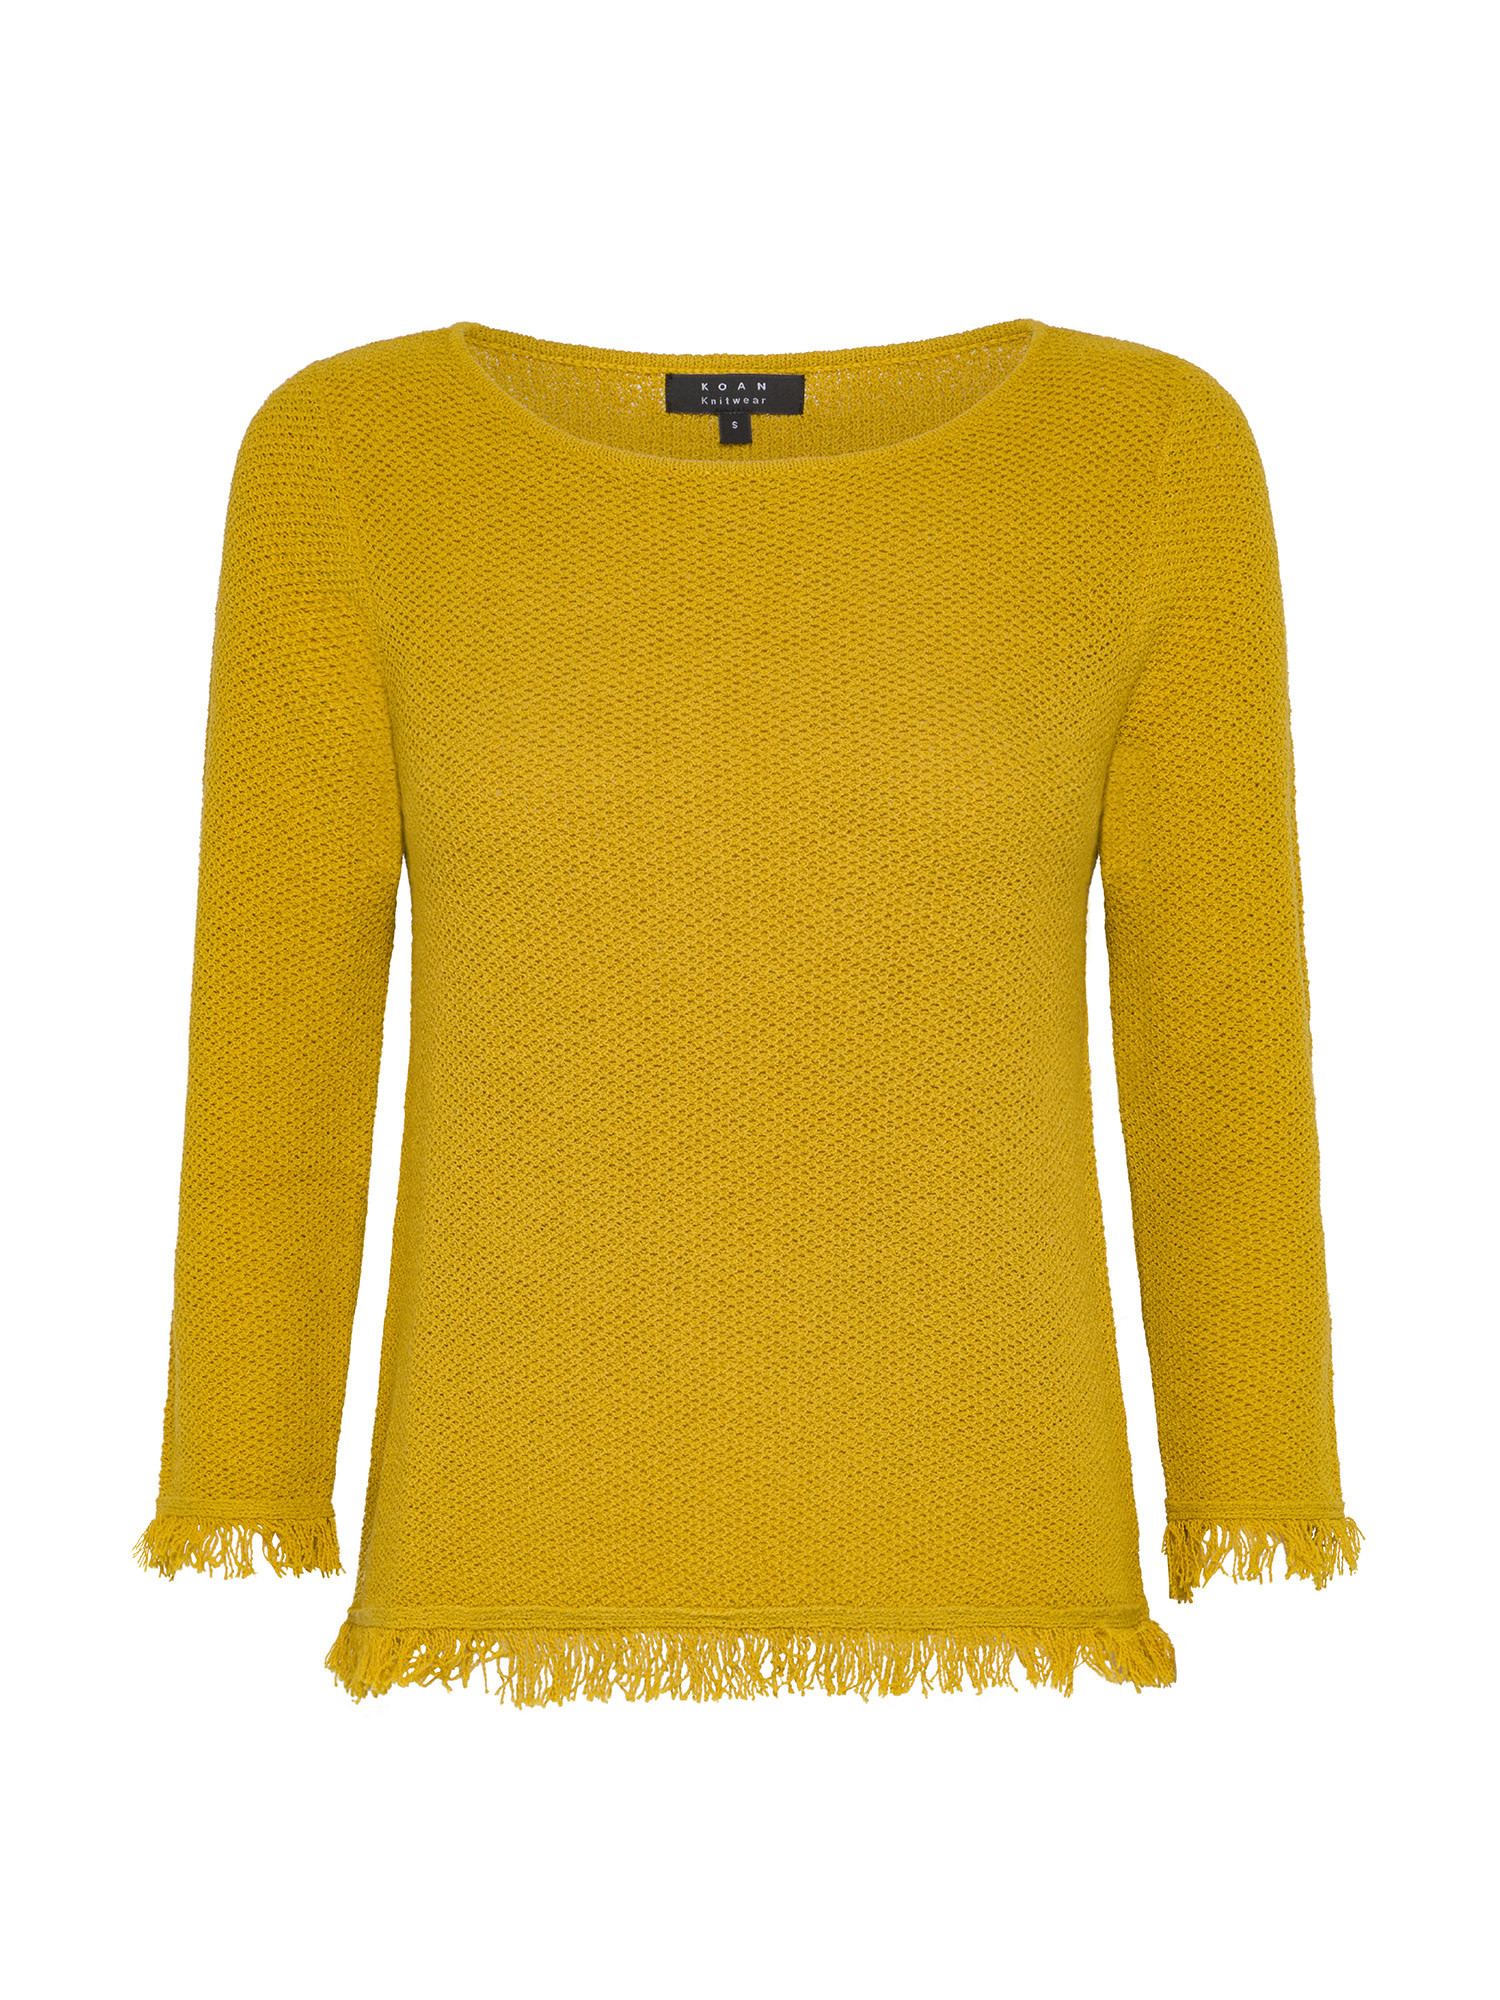 Koan - Pullover con frangette, Giallo ocra, large image number 0